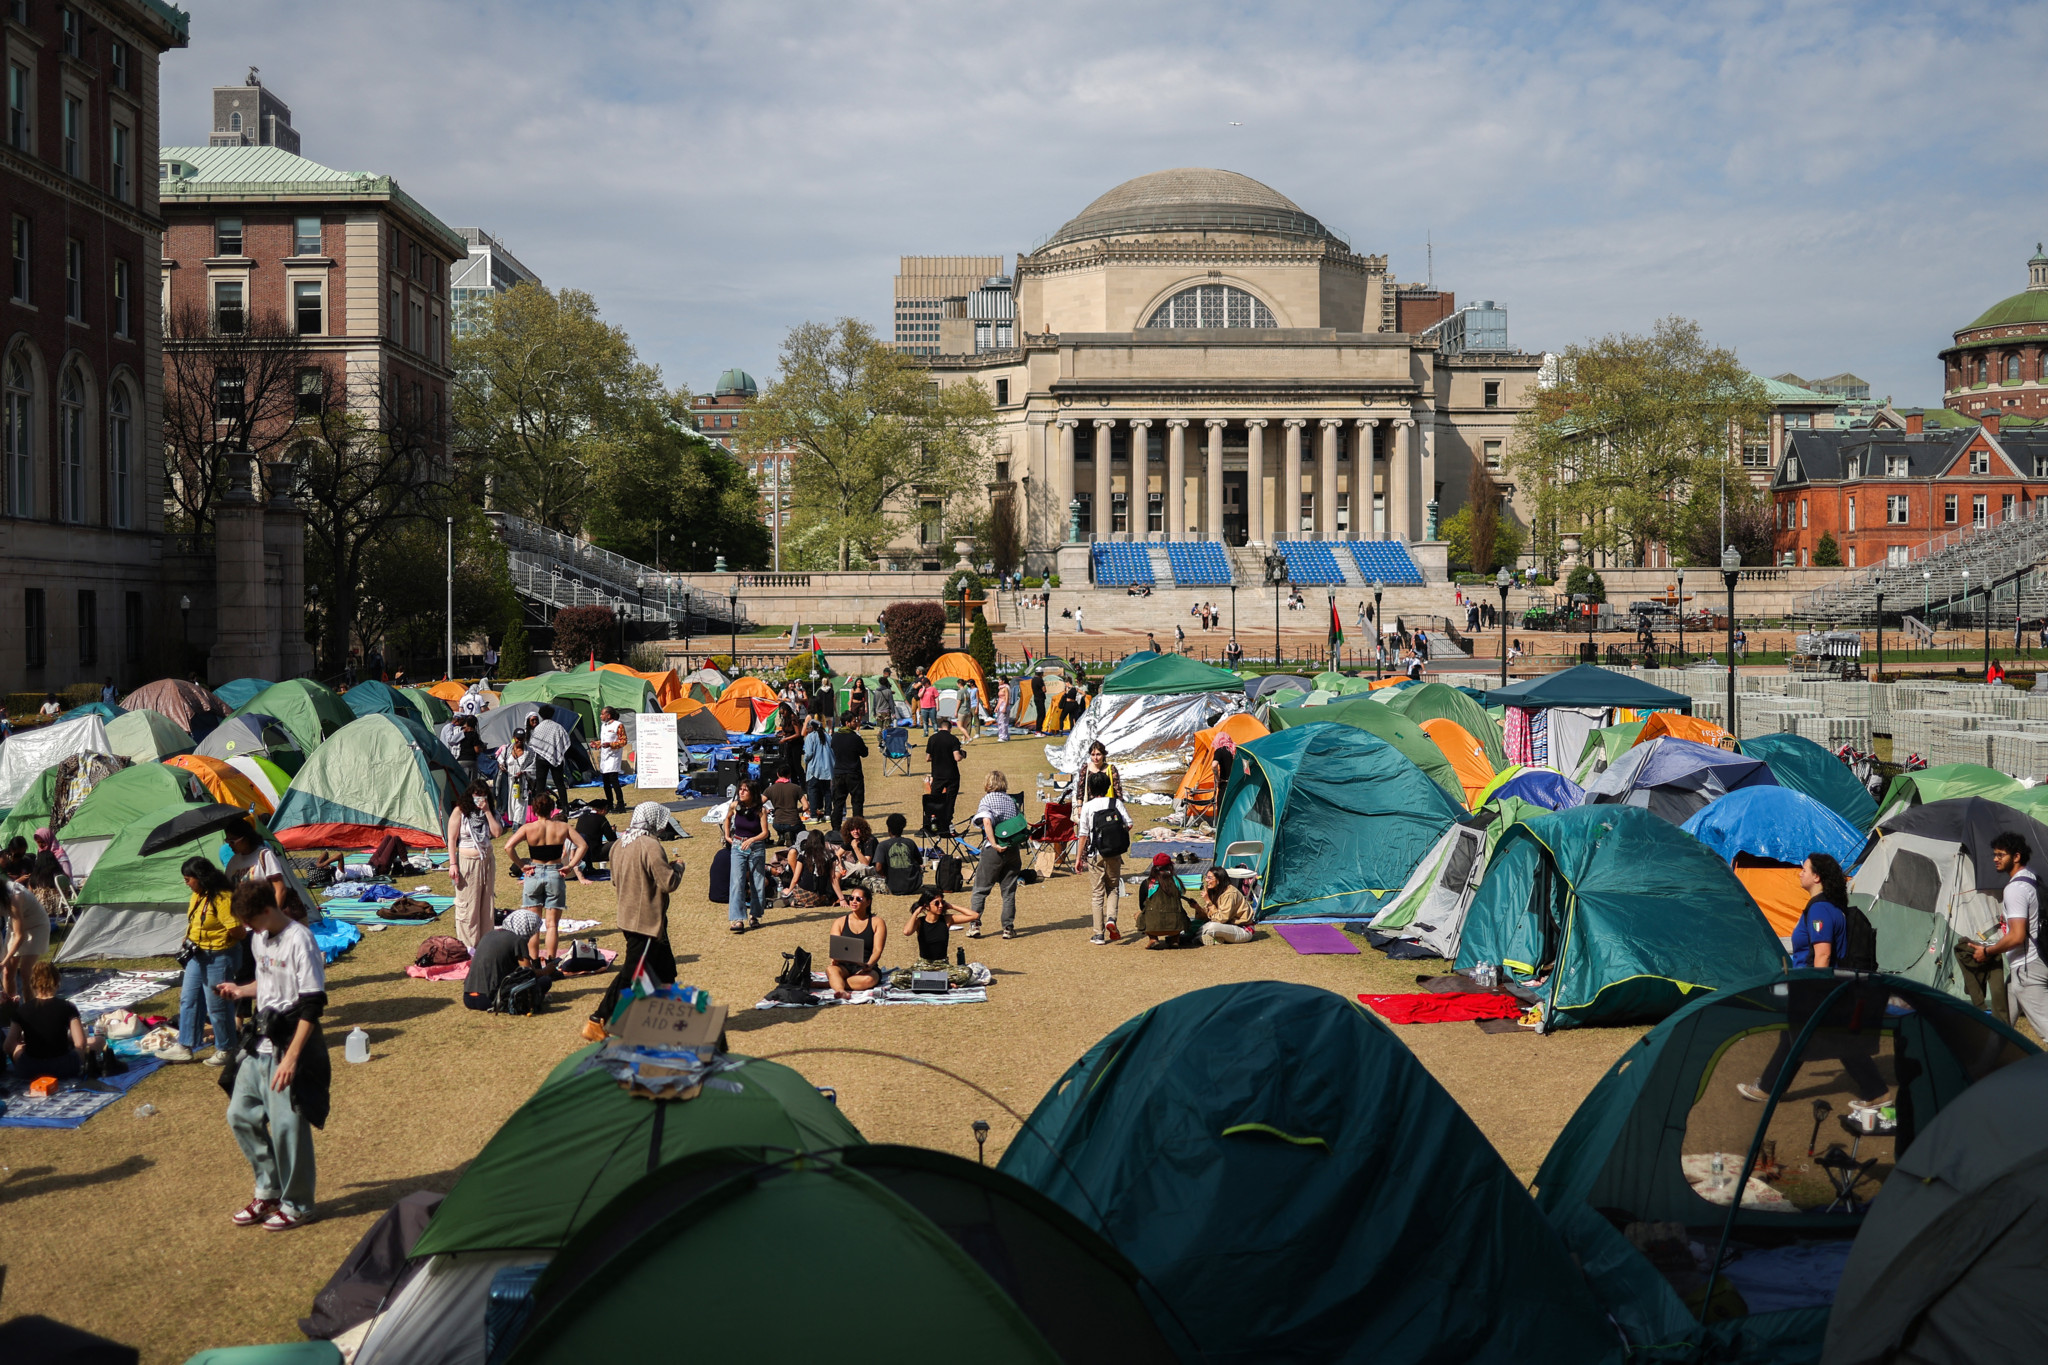 Pro-Palestinian encampment at the Columbia University on April 28, 2024 in New York City. The protests against Israel's war with Hamas began at Columbia University earlier this month before spreading to campuses across the country. They have posed a major challenge to university administrators who are trying to balance campus commitments to free expression with complaints that the rallies have crossed a line. (Photo by Charly TRIBALLEAU / AFP)